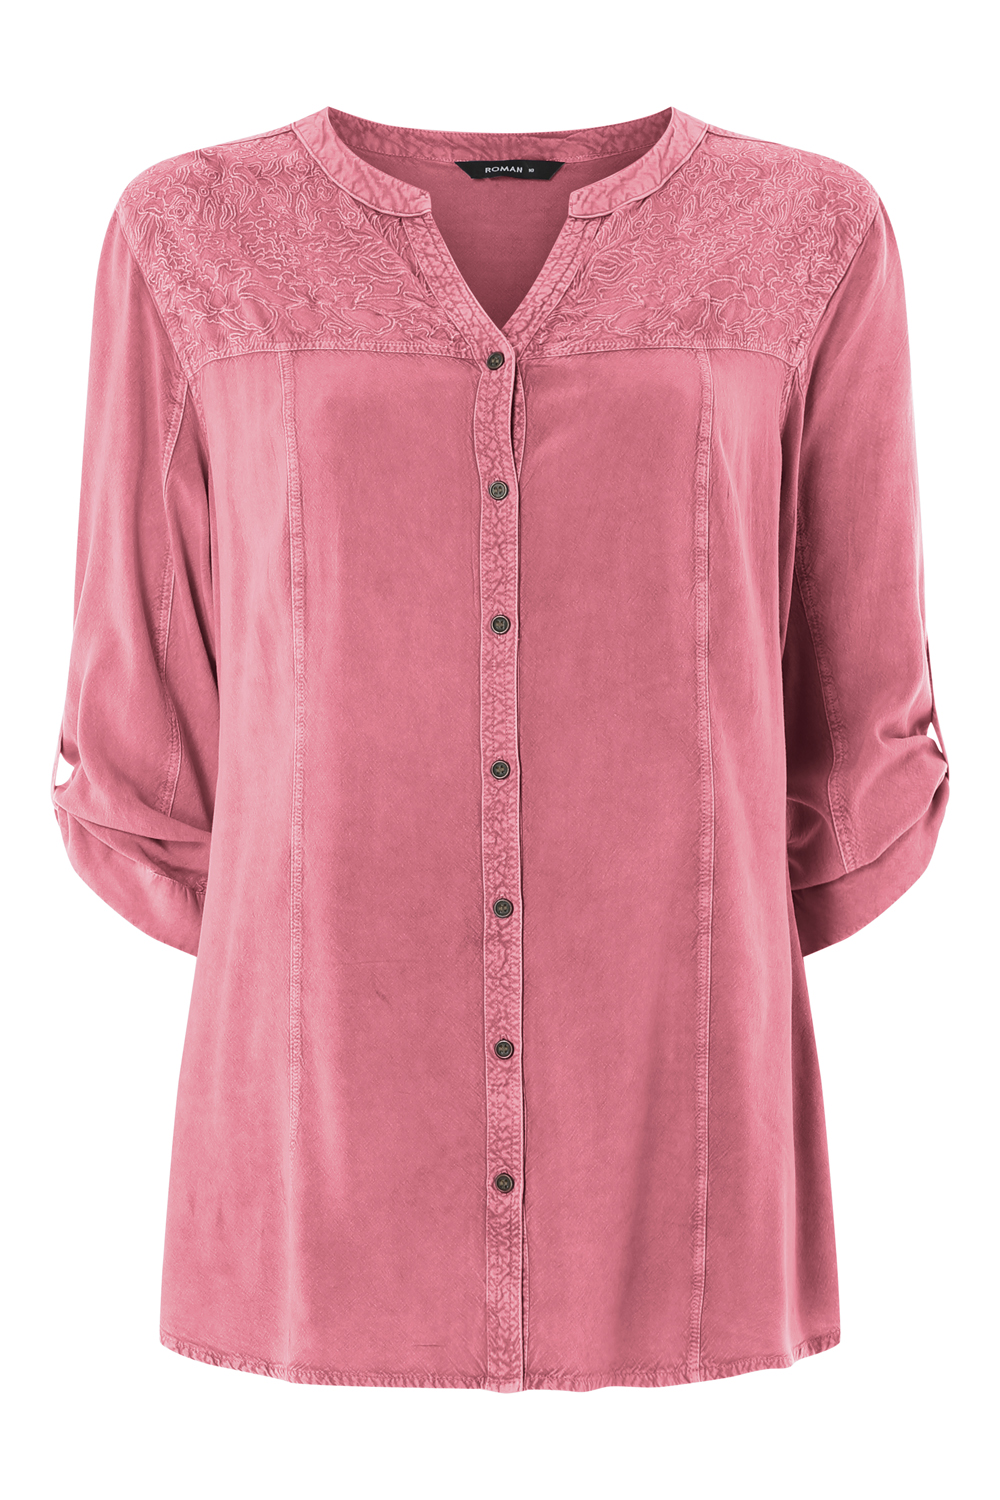 PINK Embroidered Button Through Blouse , Image 4 of 9